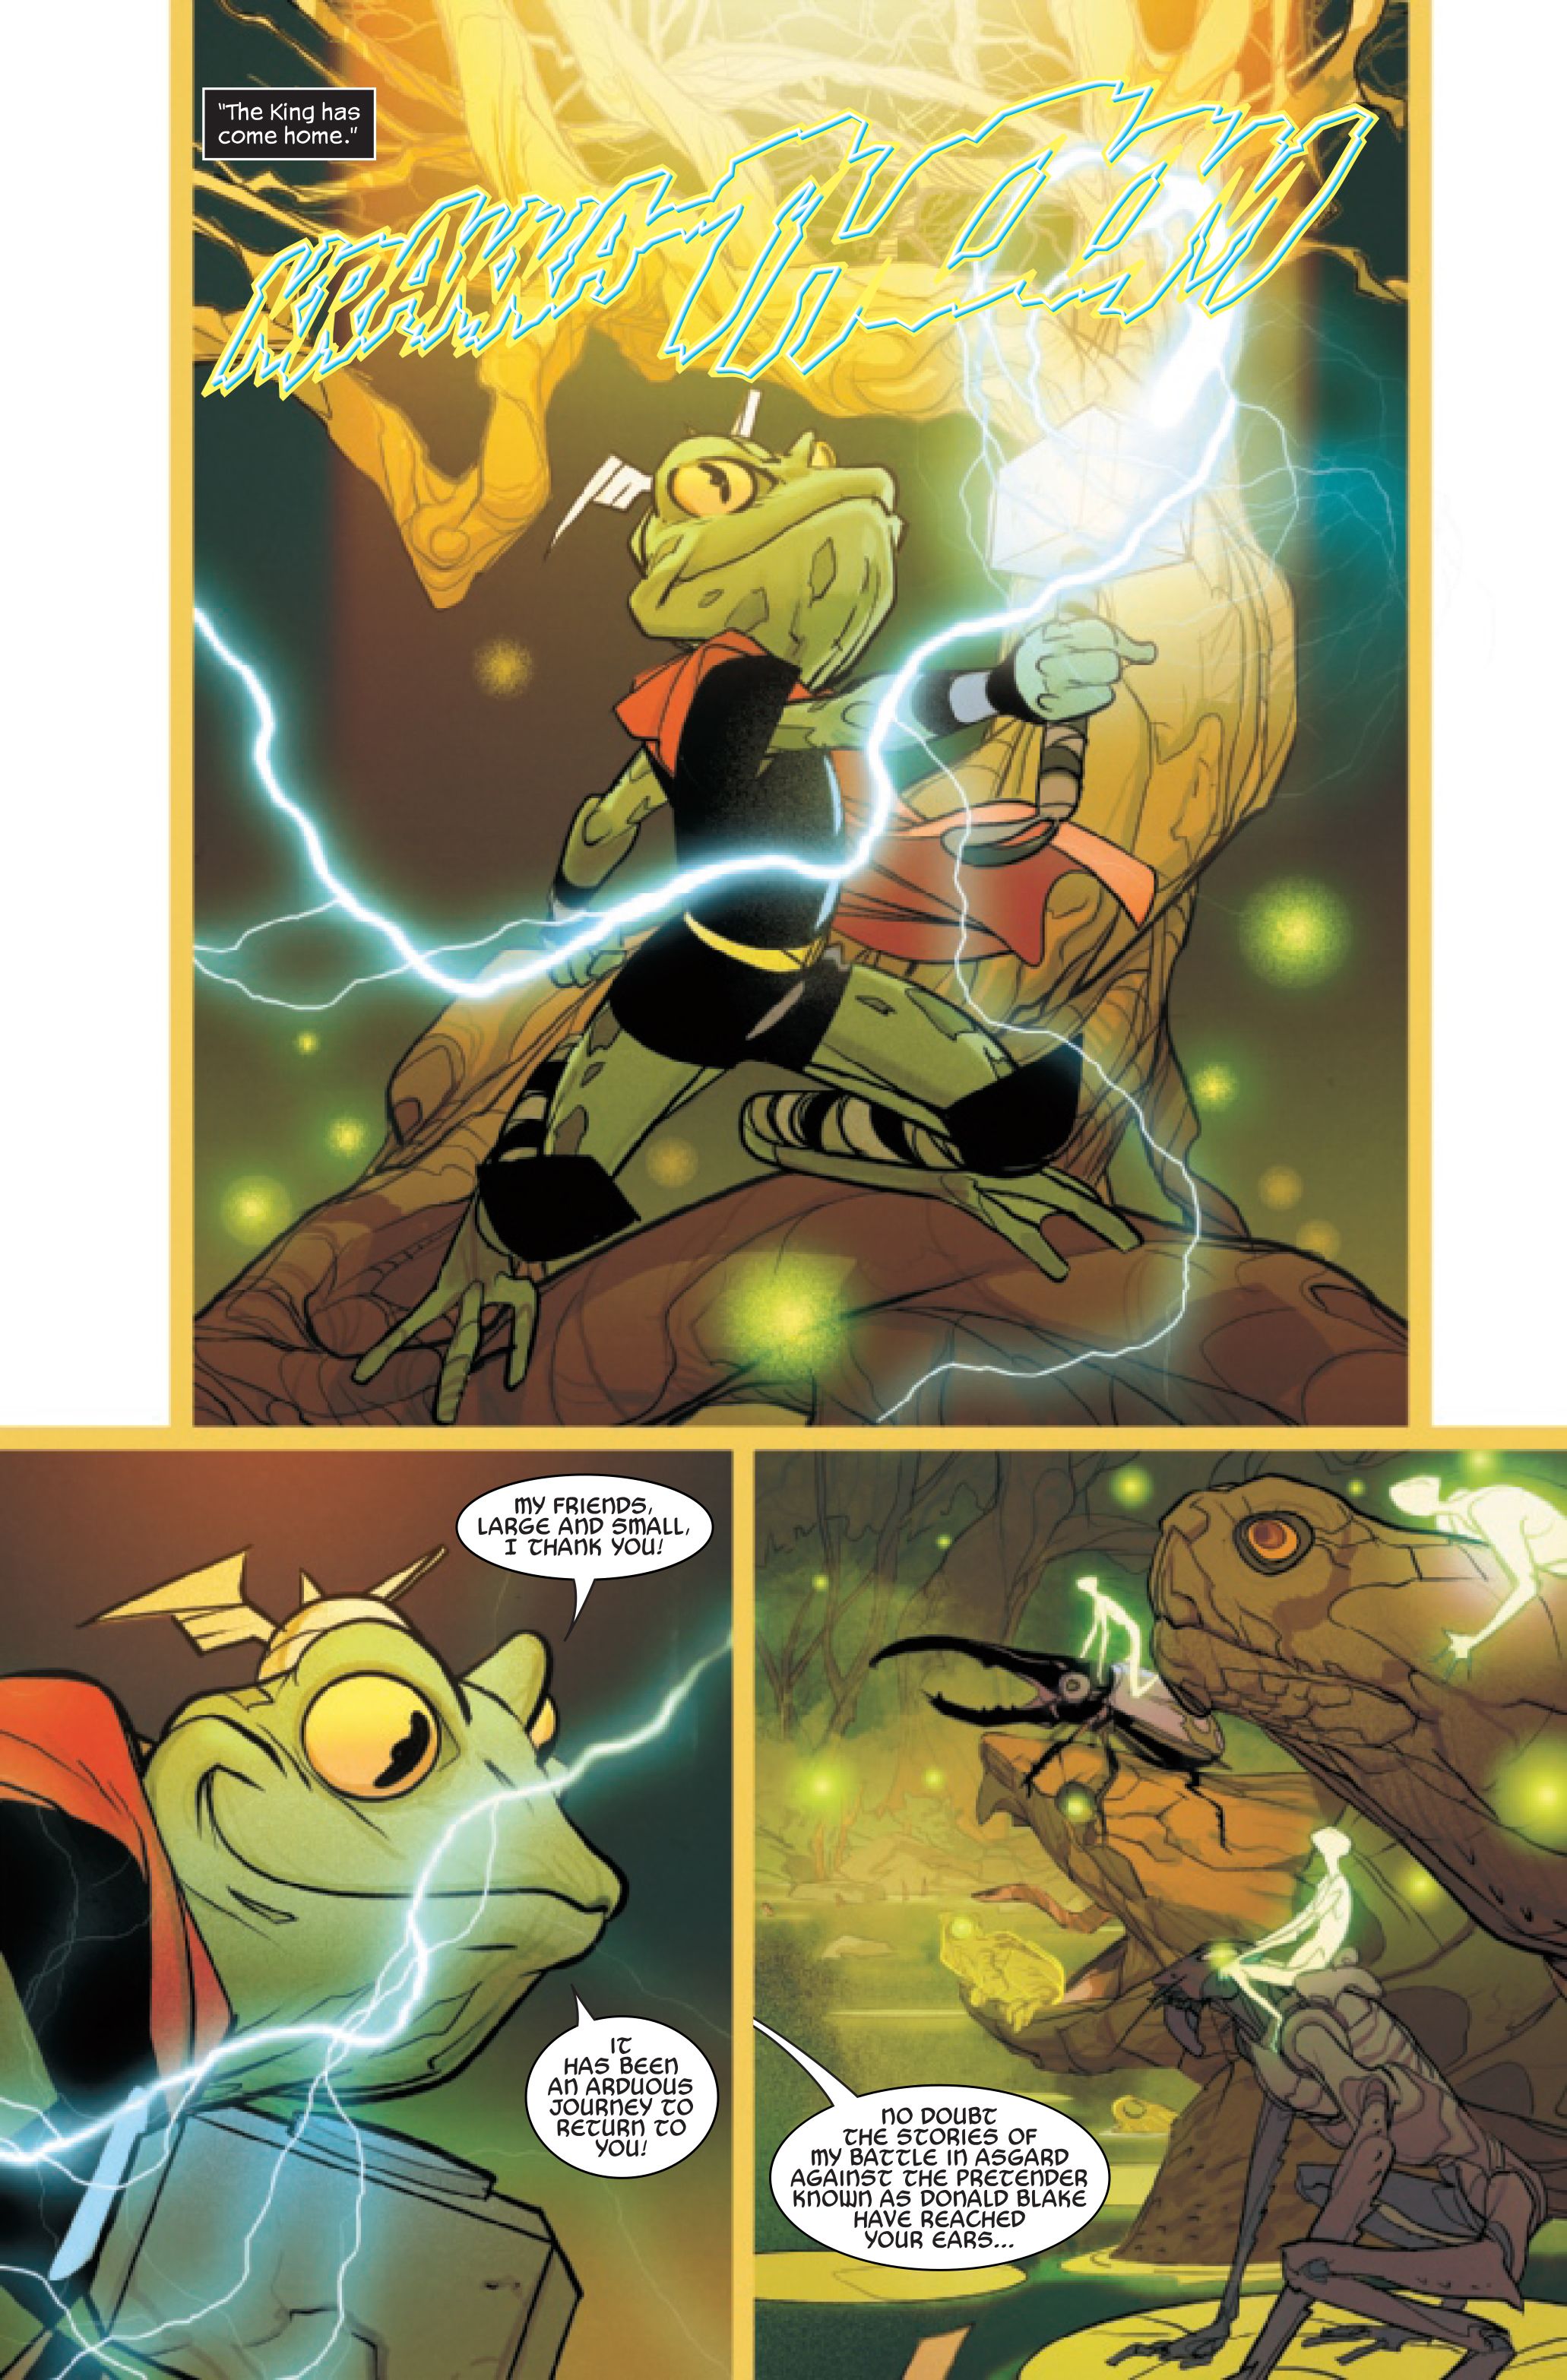 Page 5 of Thor #18, by Donny Cates, Pasqual Ferry and Bob Quinn.